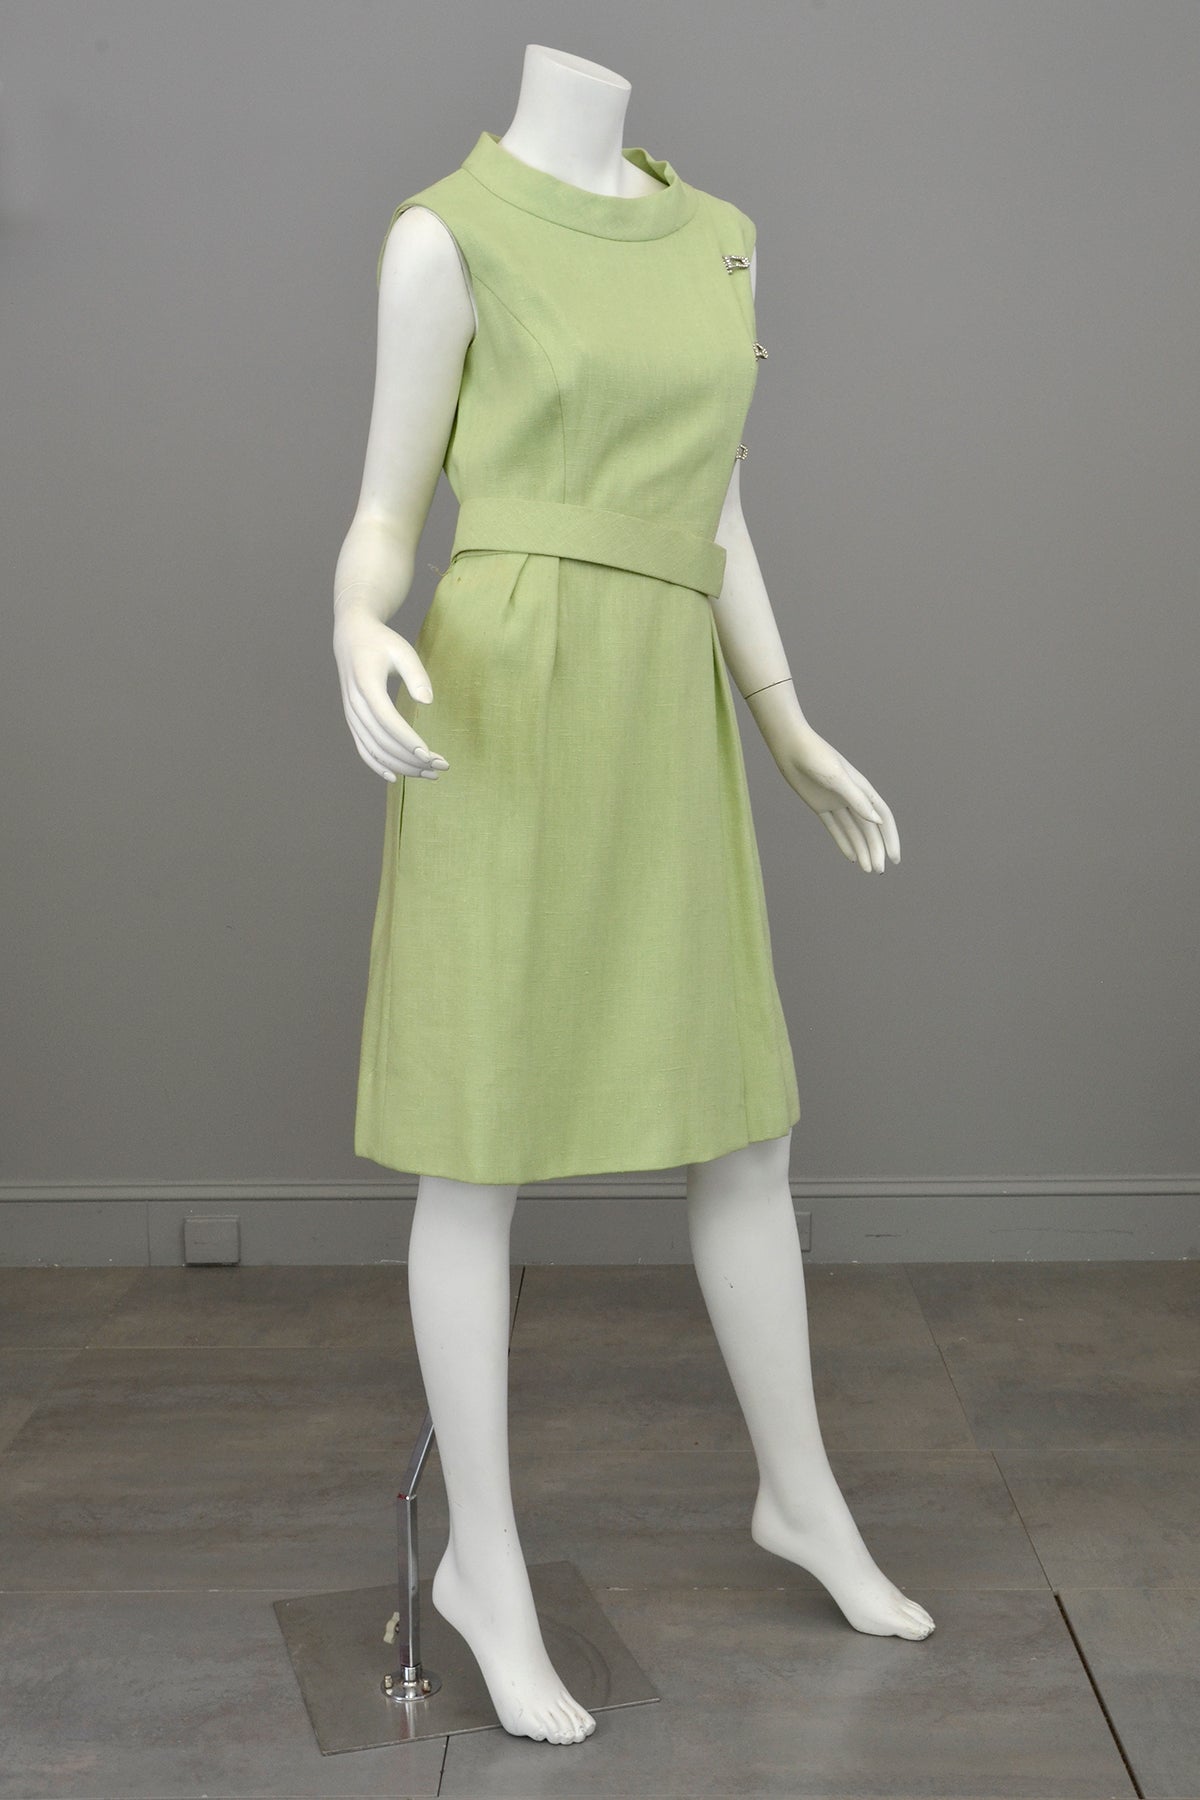 1960s Citrus Lime Green Crystal Buttons Retro Dress by Adele Simpson